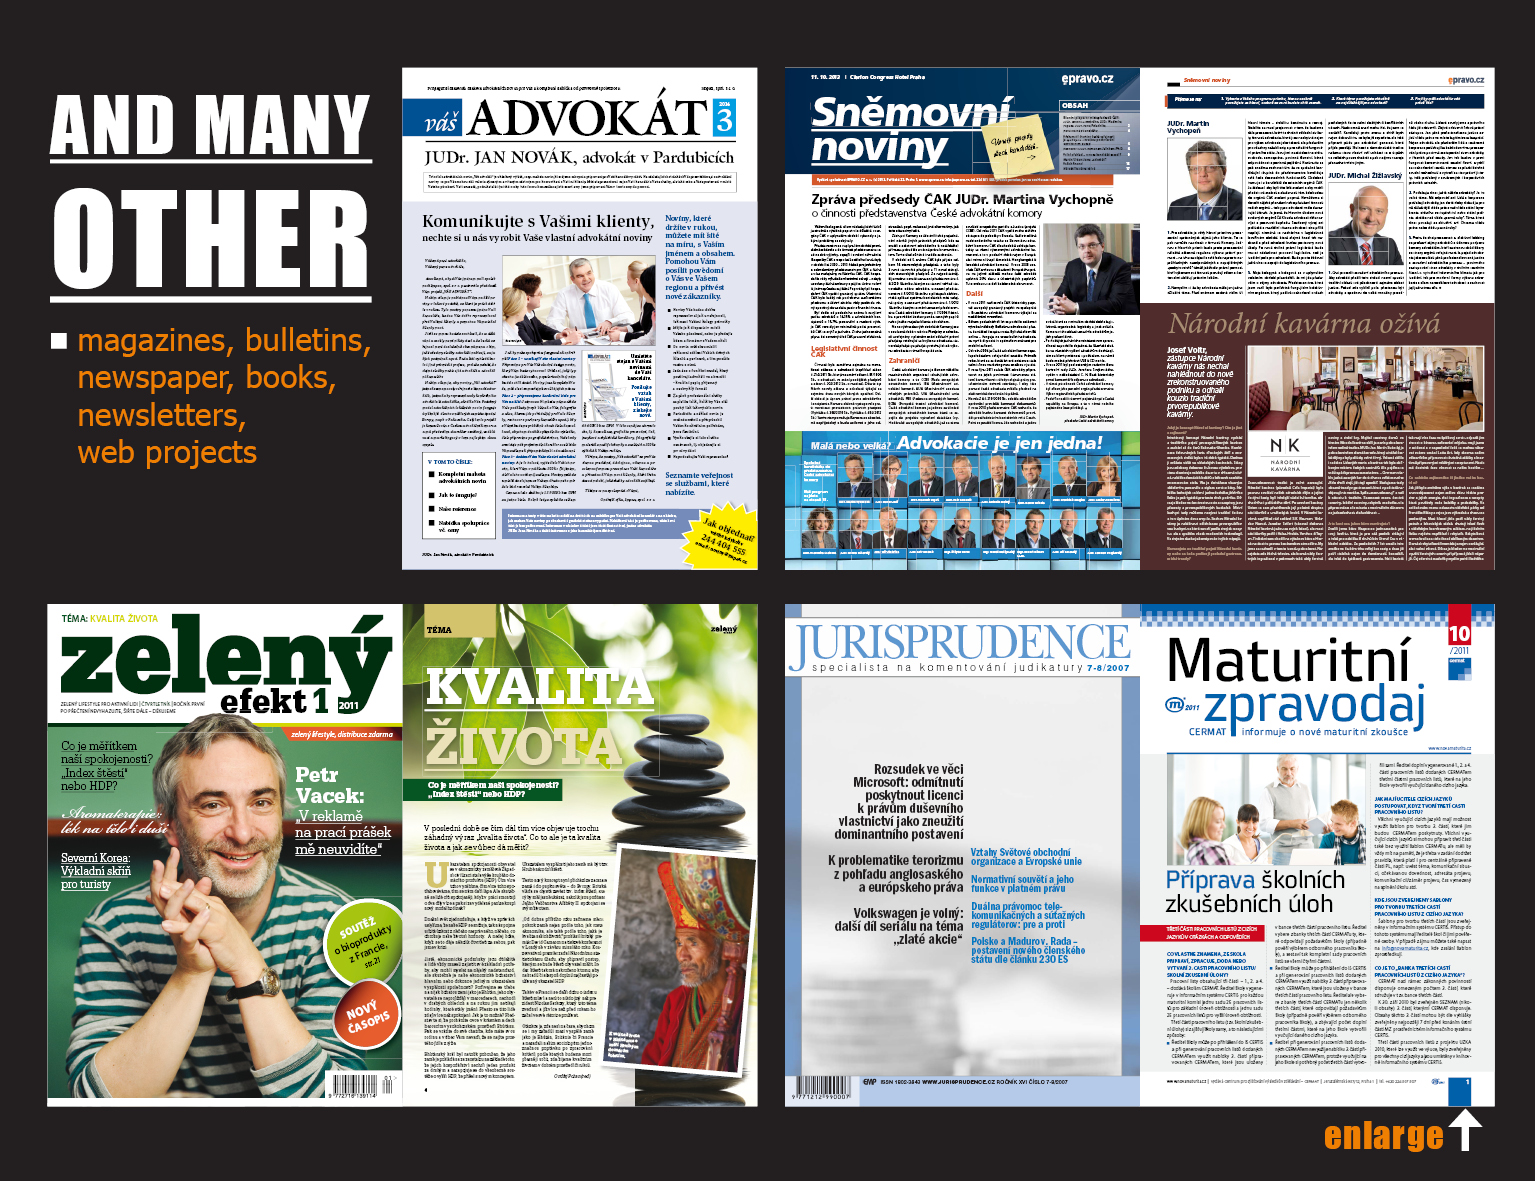 Magazines, bulletins, newspaper, books, newsletters, 
web projects